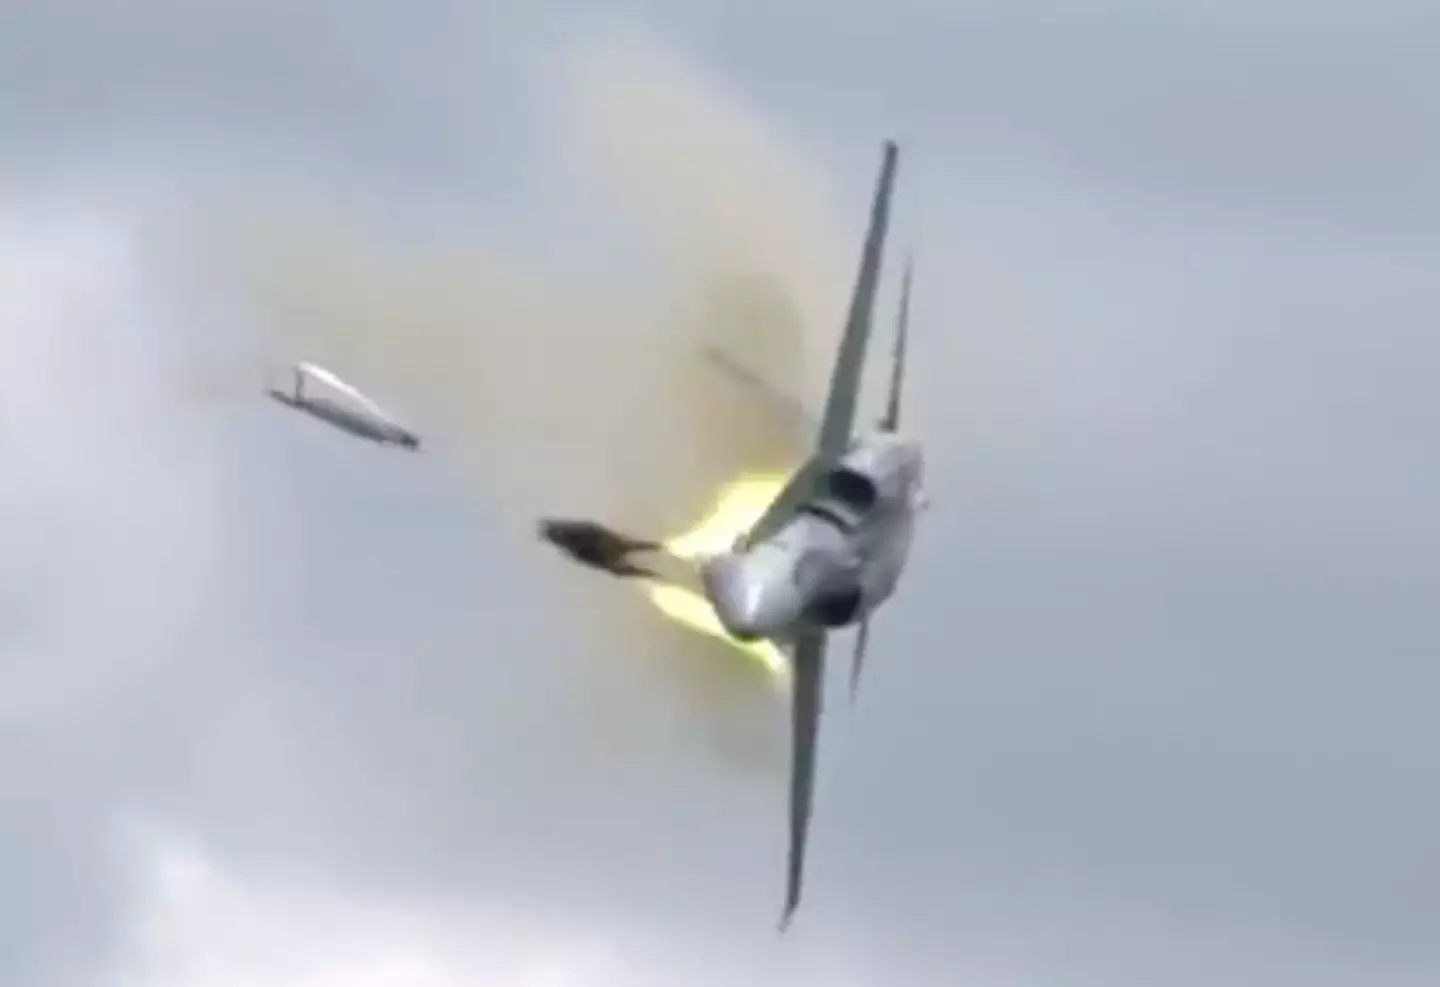 Pilot Brian Bews ejected just 1.8 seconds before impact.